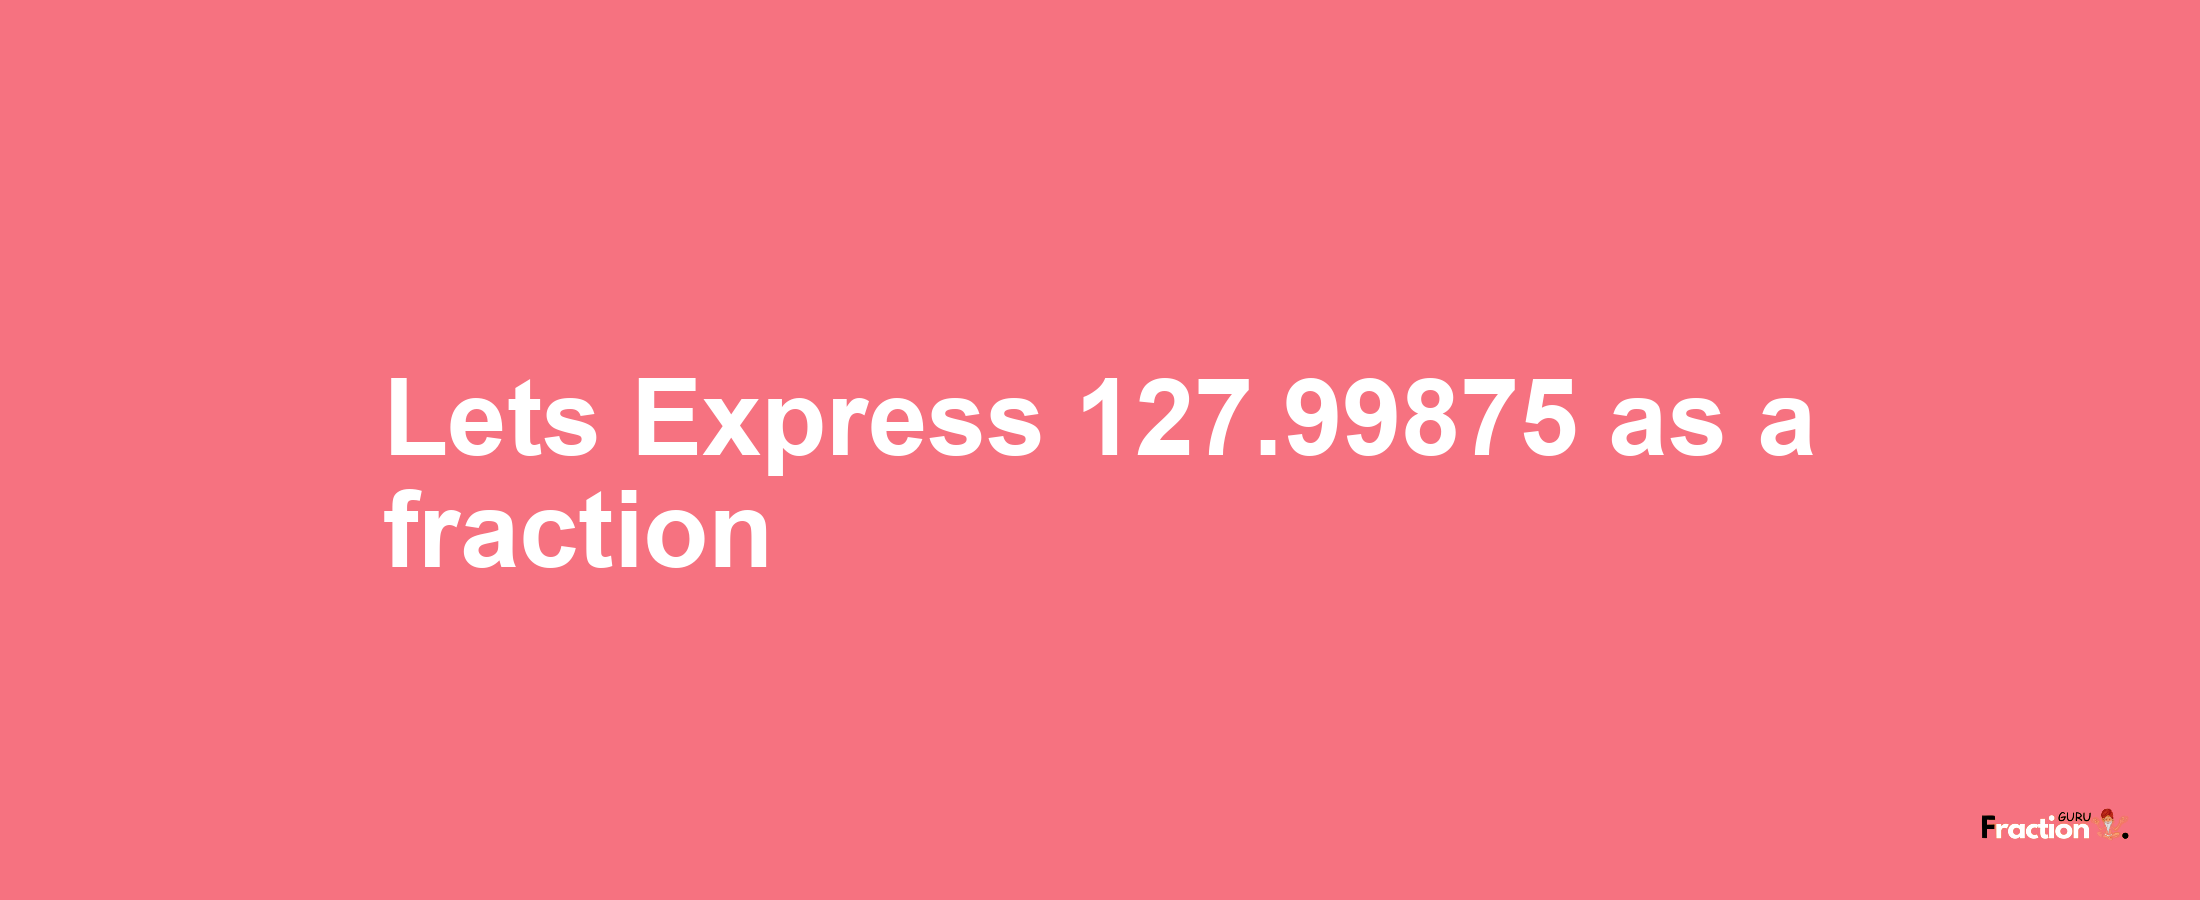 Lets Express 127.99875 as afraction